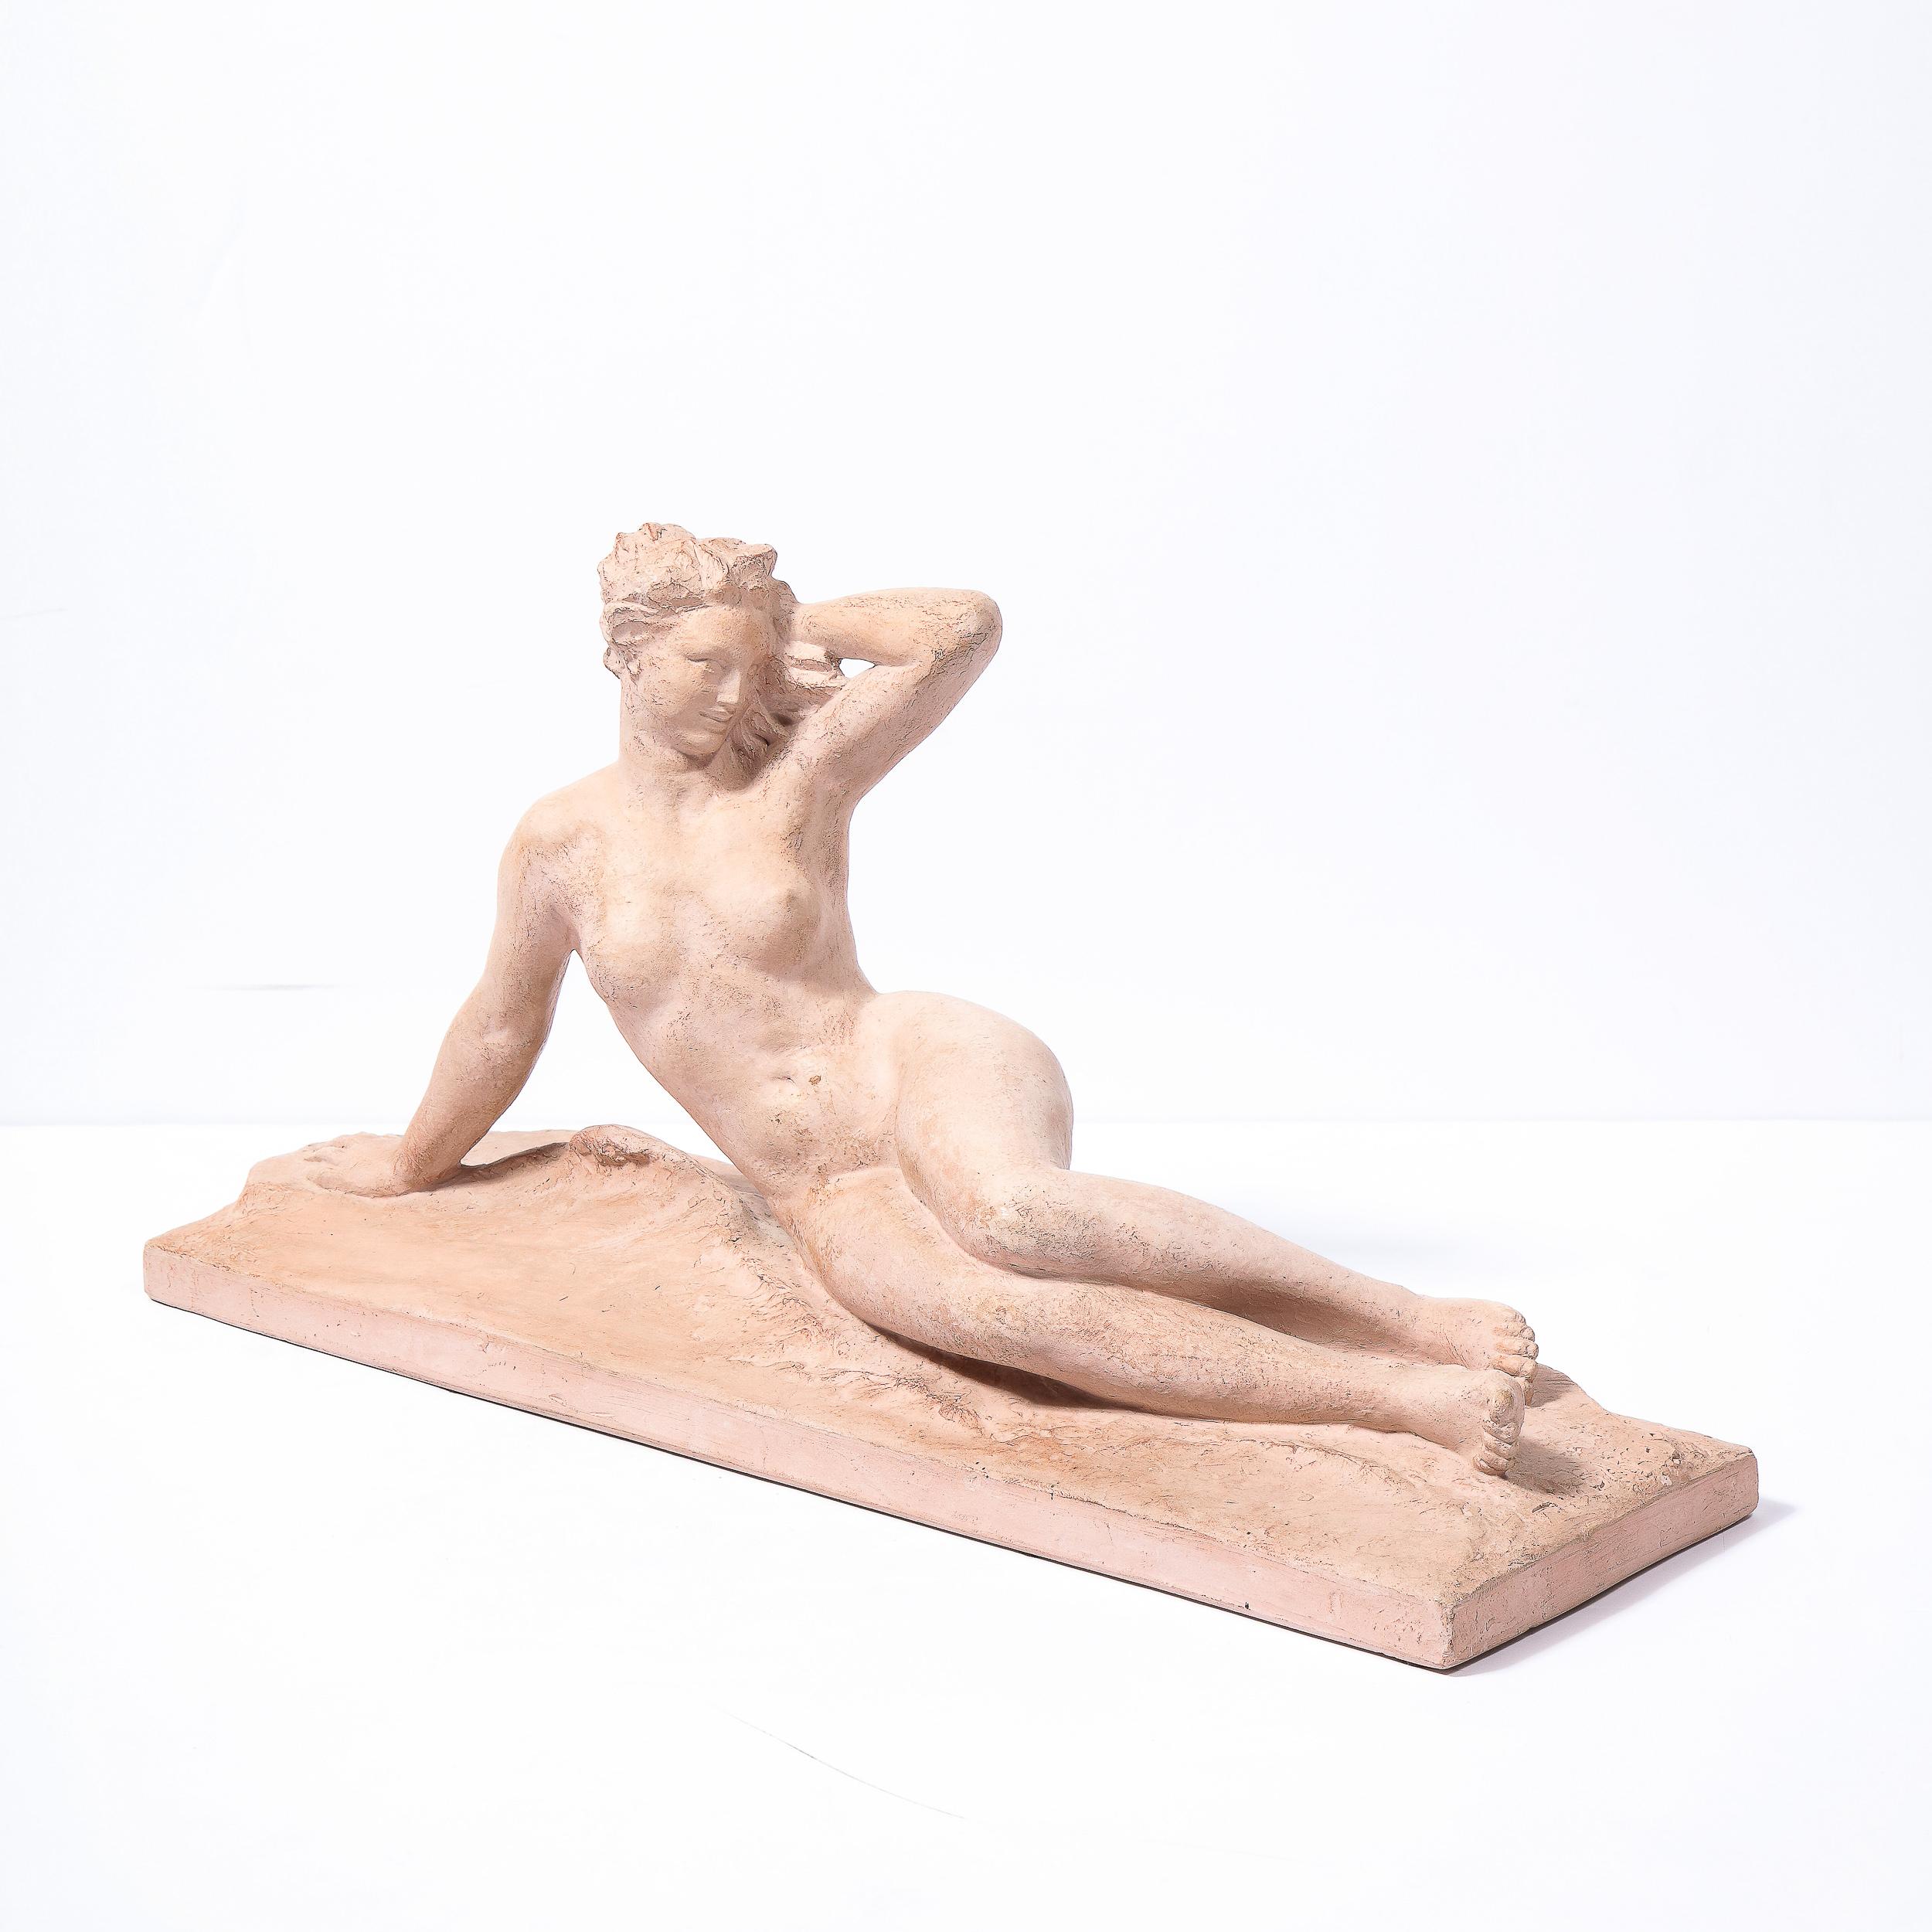 This refined and sophisticated Art Deco statue by Henri Bargas was realized in the France, circa 1930. Composed exclusively of terracotta- in a beautiful chalky, earthy red tone- the work offers a stylized nude female form recumbent on an undulating